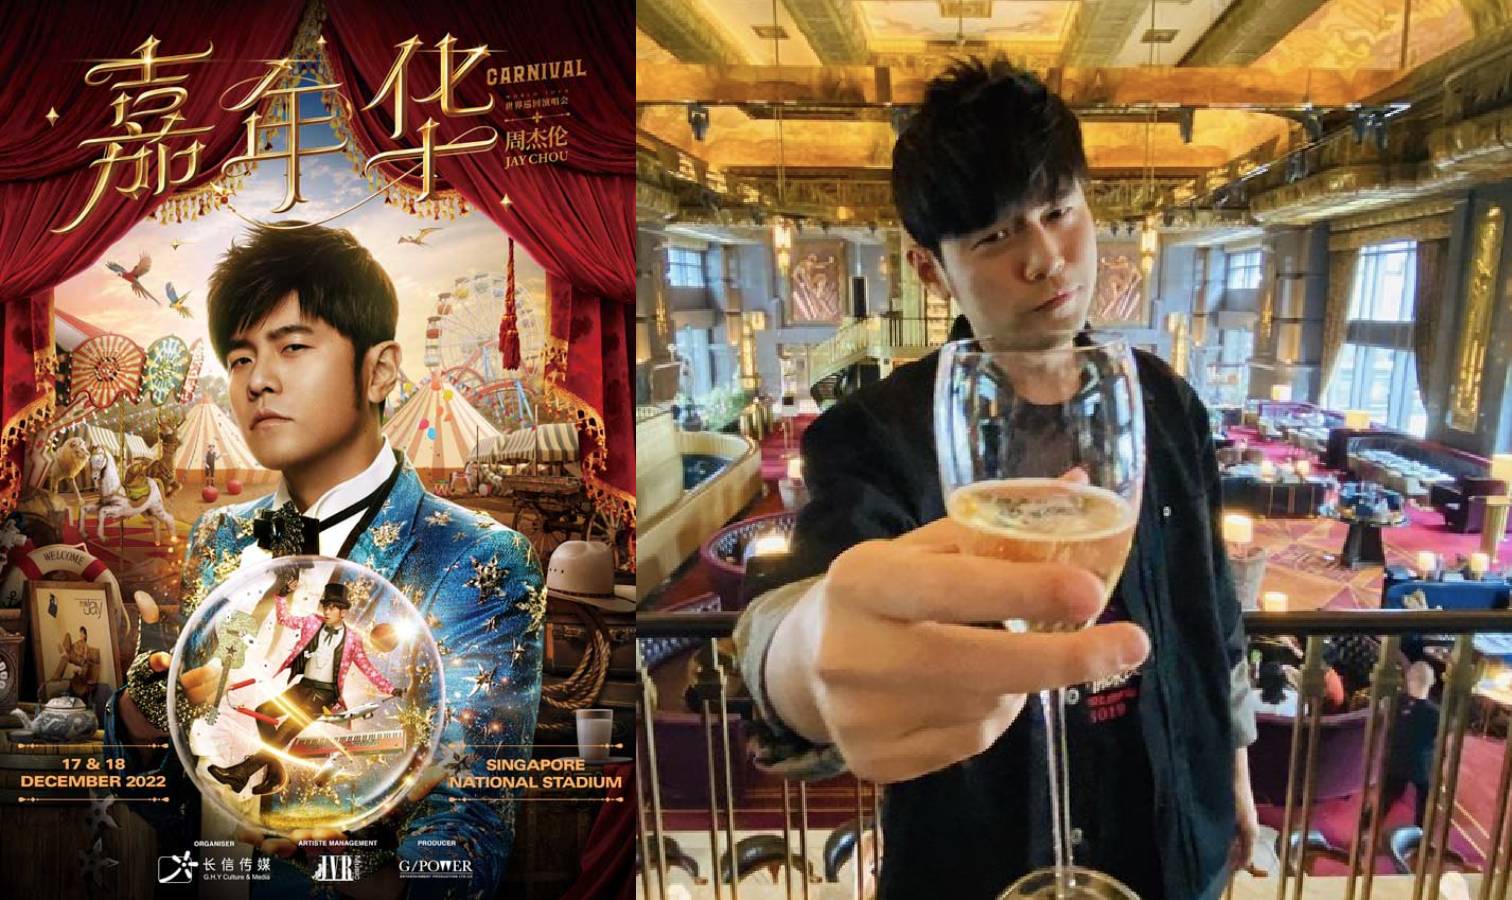 Jay Chou To Bring His Carnival World Tour To Singapore On Dec 17 & 18